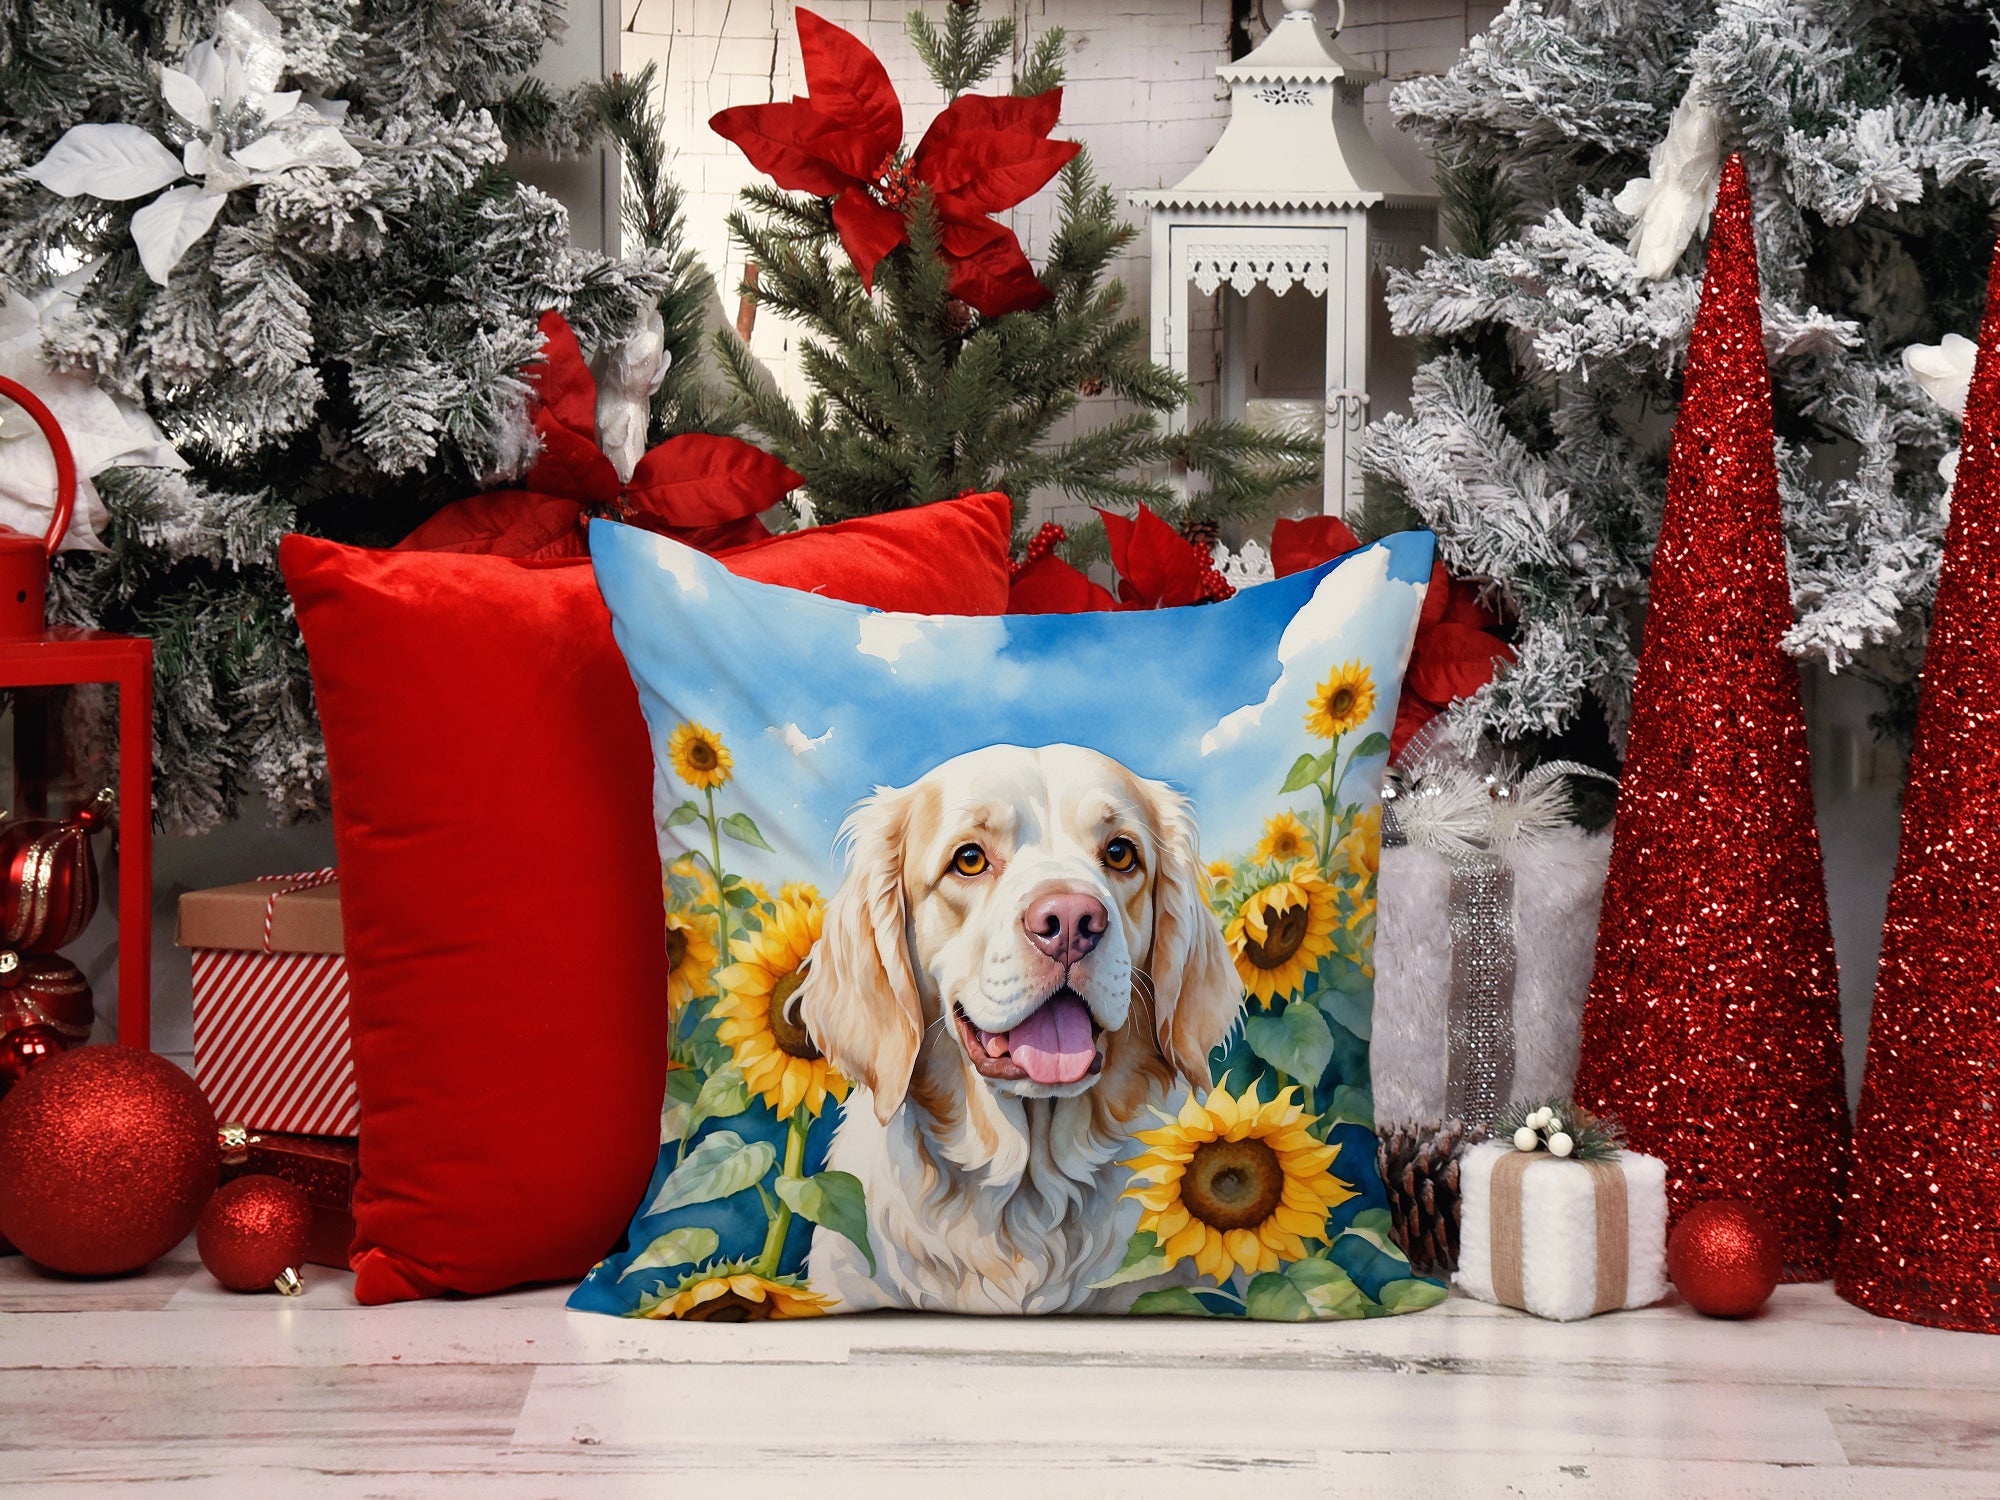 Clumber Spaniel in Sunflowers Throw Pillow